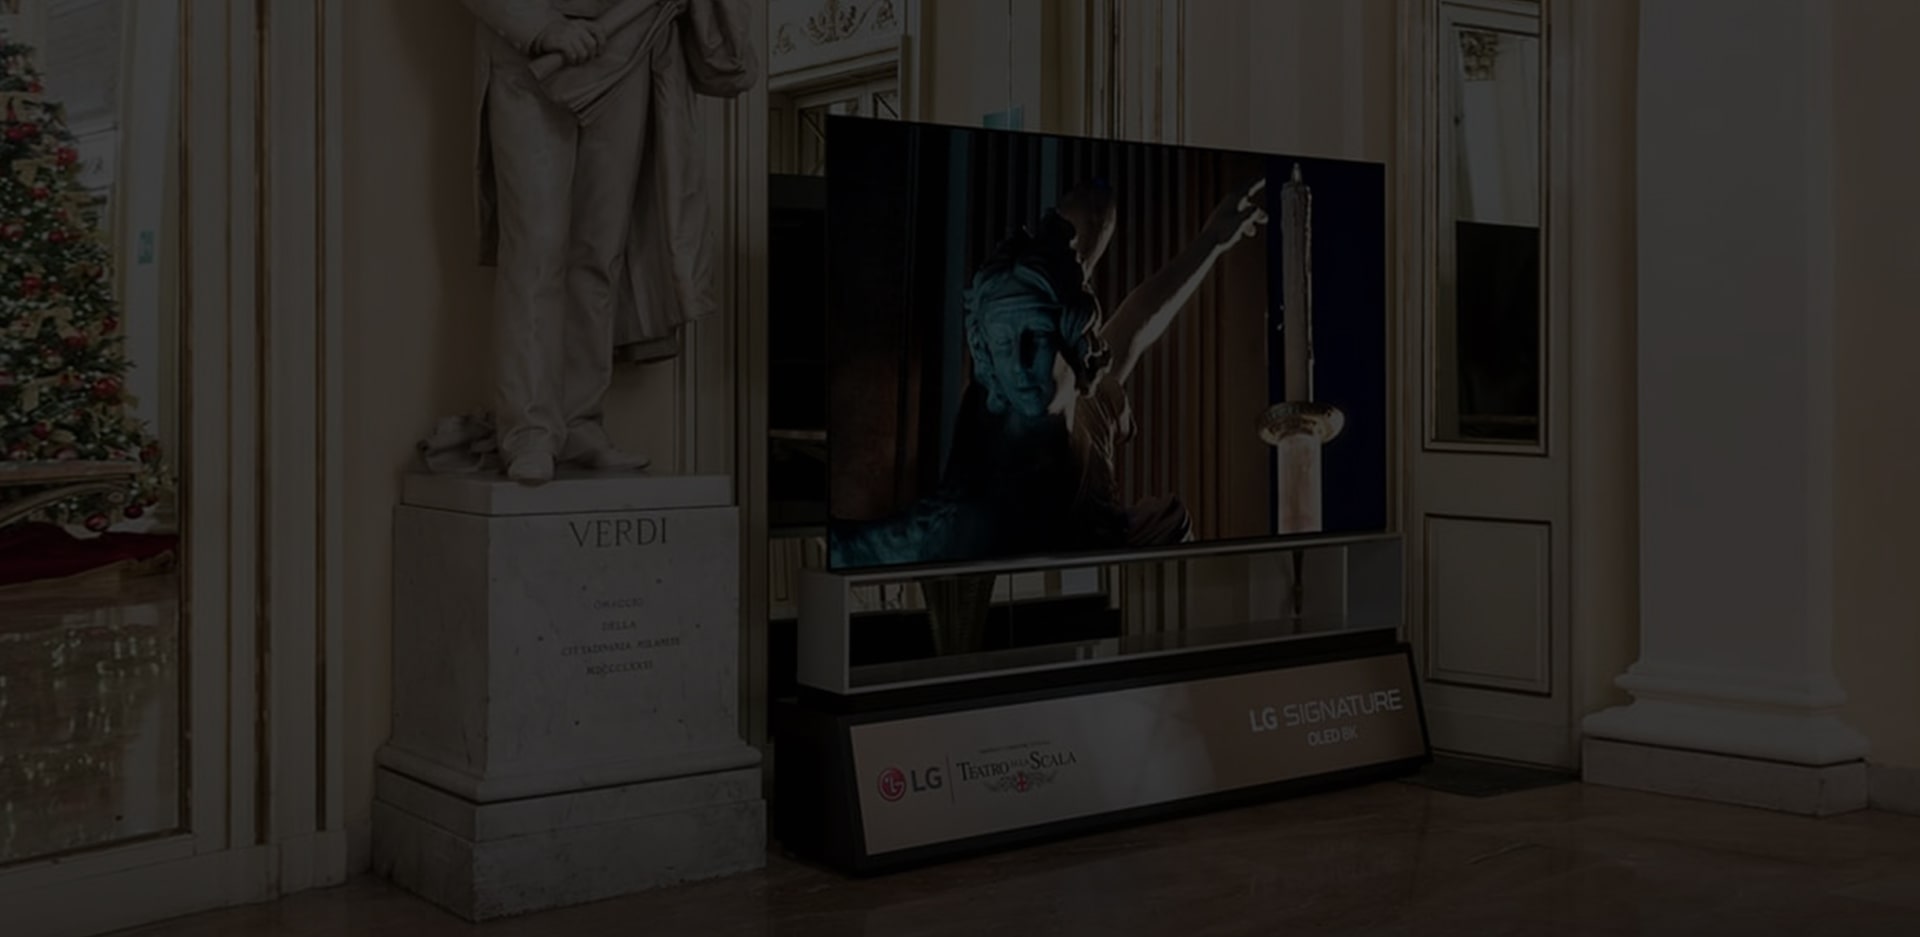 LG SIGNATURE 8K OLED TV showing the look of statue on its screen is displayed at La Scala opera house.